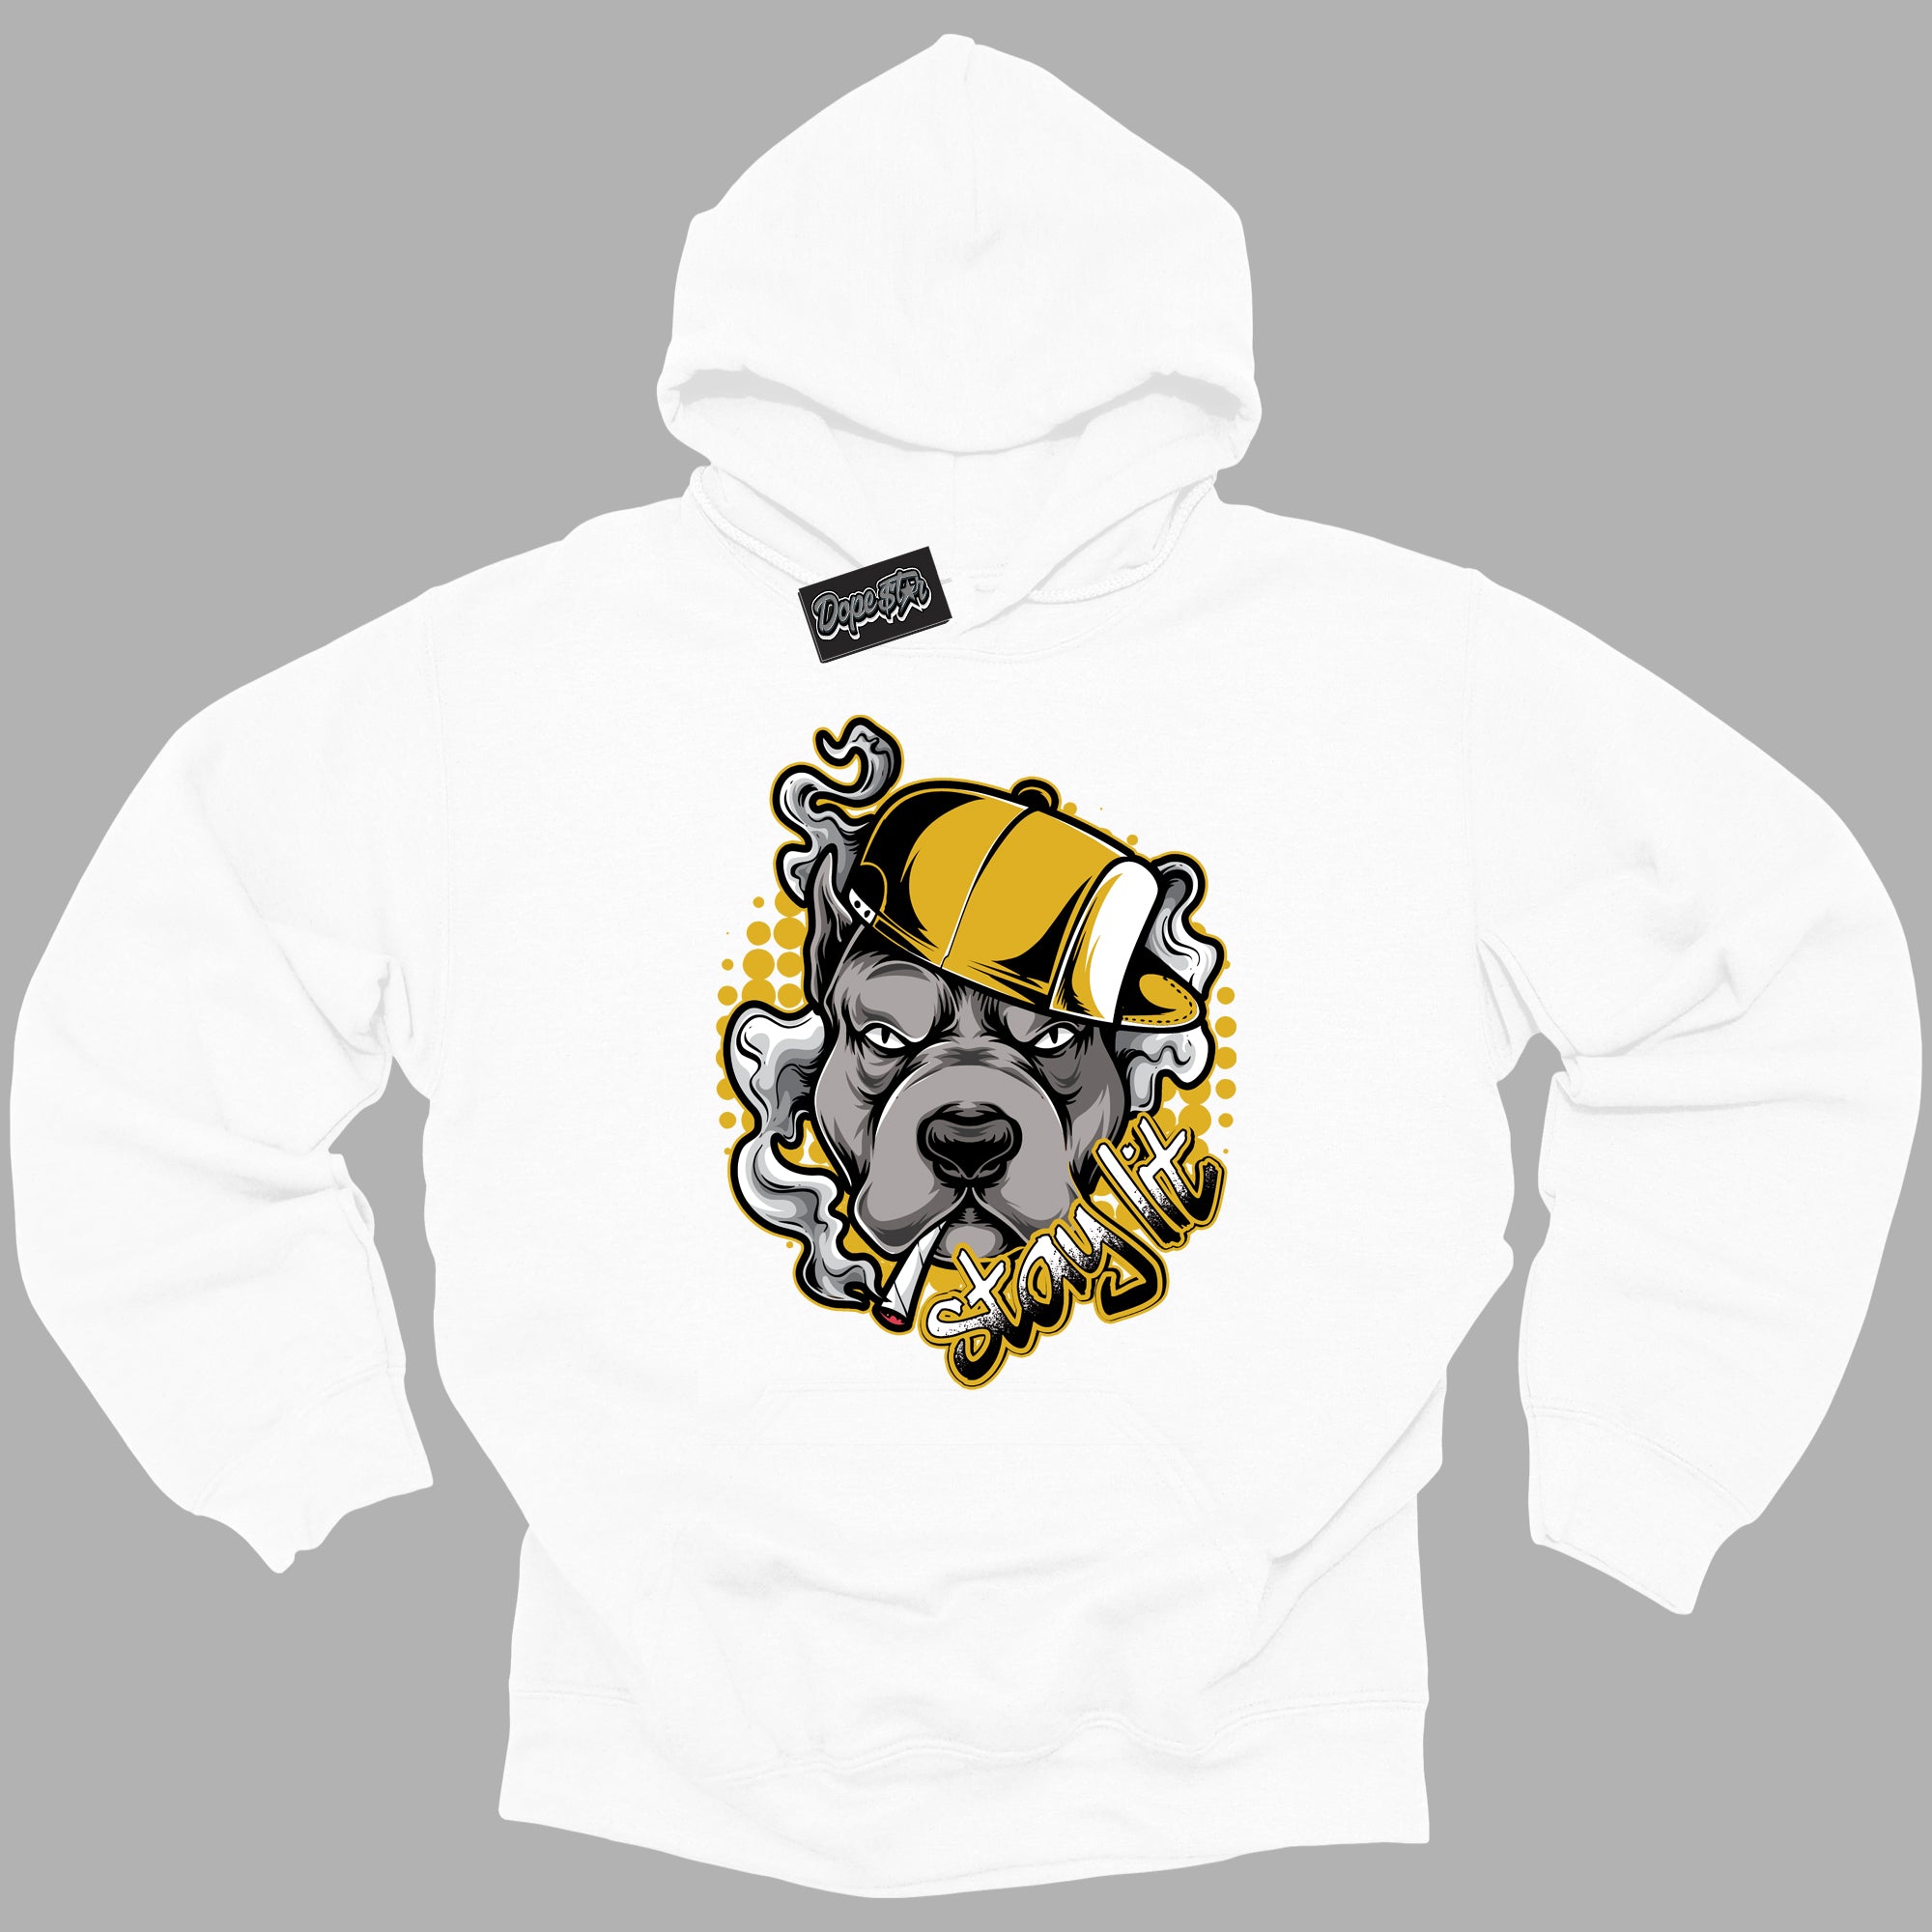 Cool White Hoodie with “ Stay Lit ”  design that Perfectly Matches Yellow Ochre 6s Sneakers.